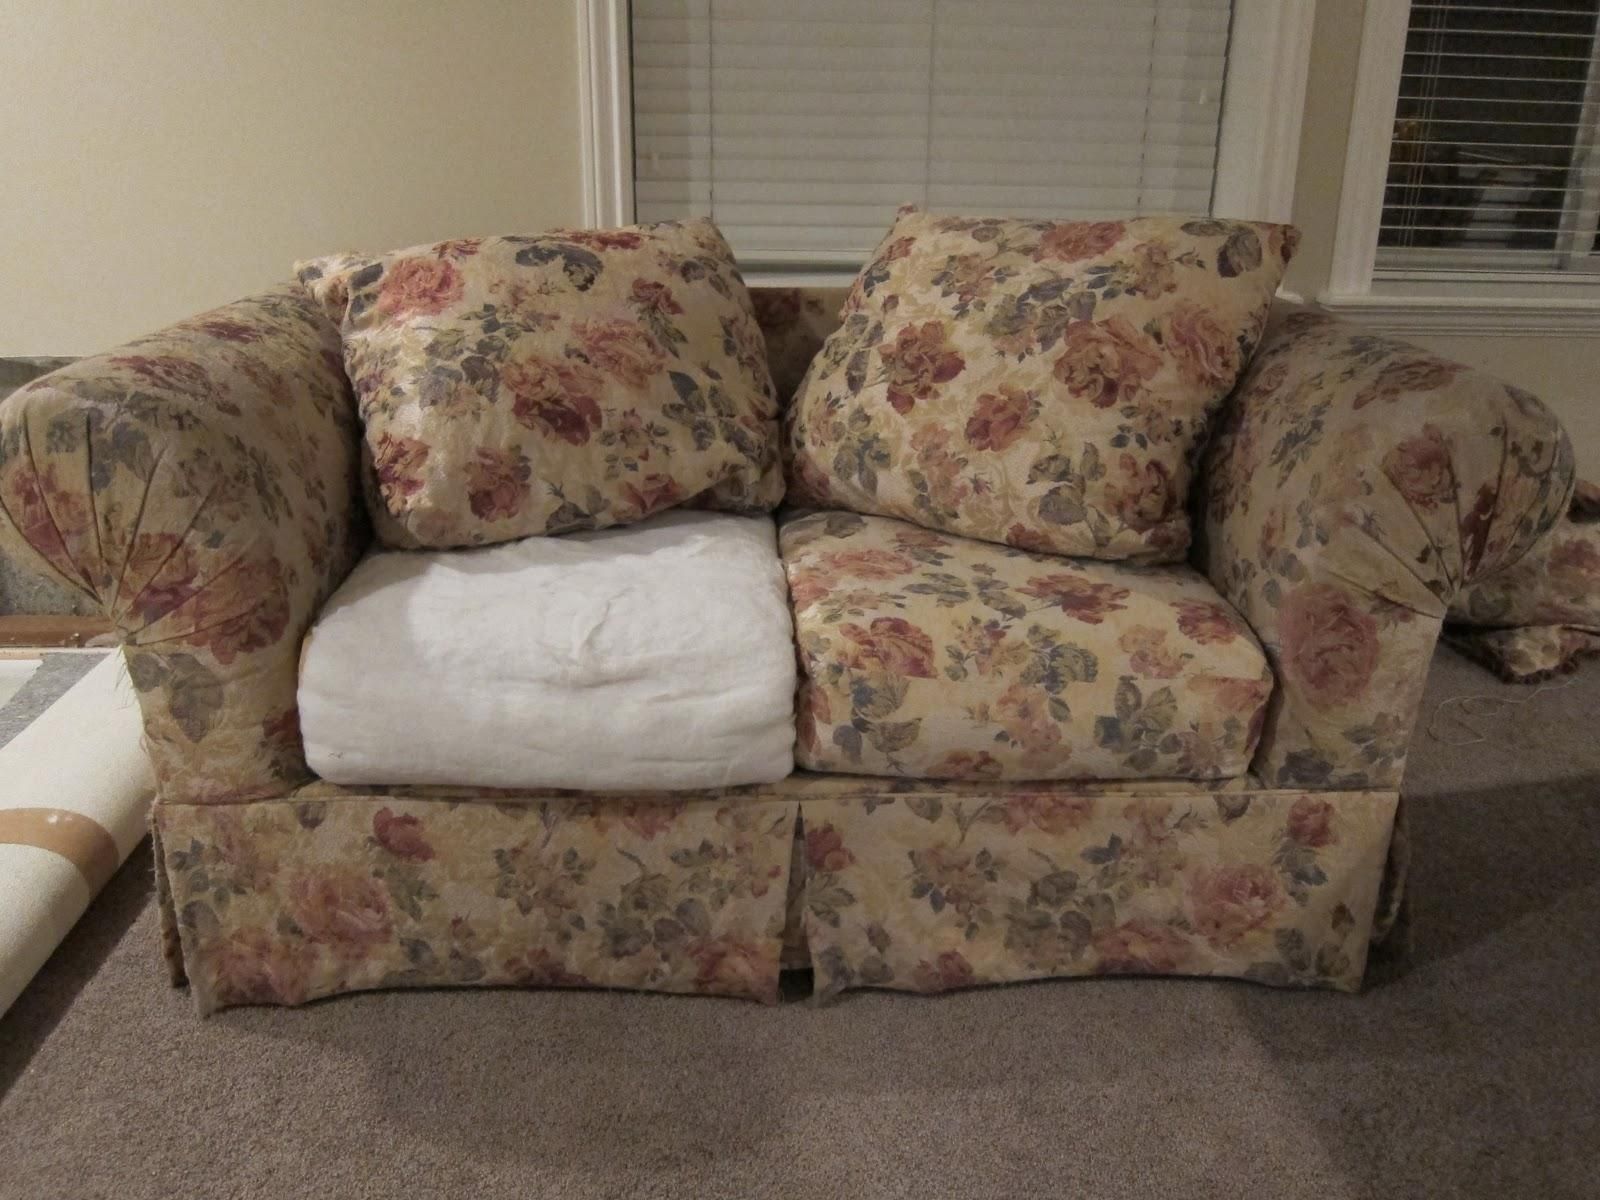 Do It Yourself Divas: Diy Strip Fabric From A Couch And Reupholster It Throughout Reupholster Sofas Cushions (View 2 of 20)